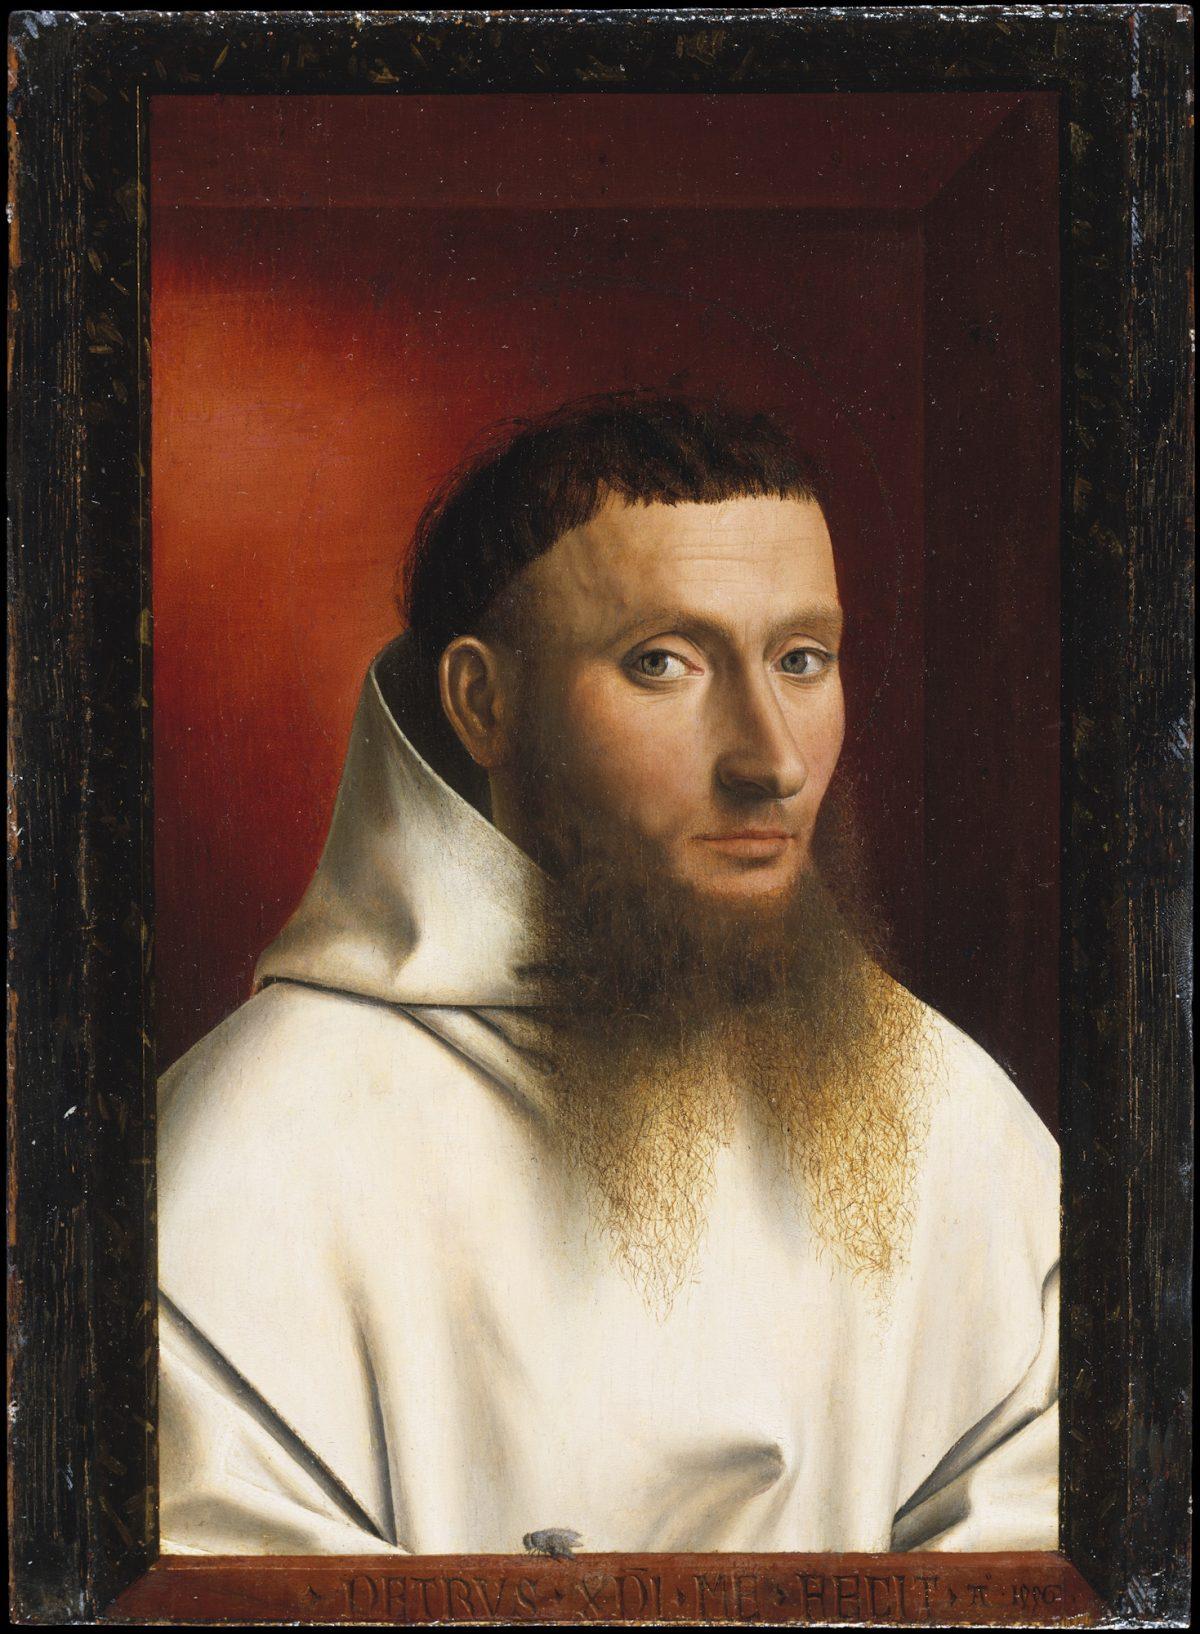 “Portrait of a Carthusian Lay Brother,” 1446, by Petrus Christus. Oil on wood, 11 1/2 inches by 8 1/2 inches. The Jules Bache Collection, The Metropolitan Museum of Art. (The Frick Collection)